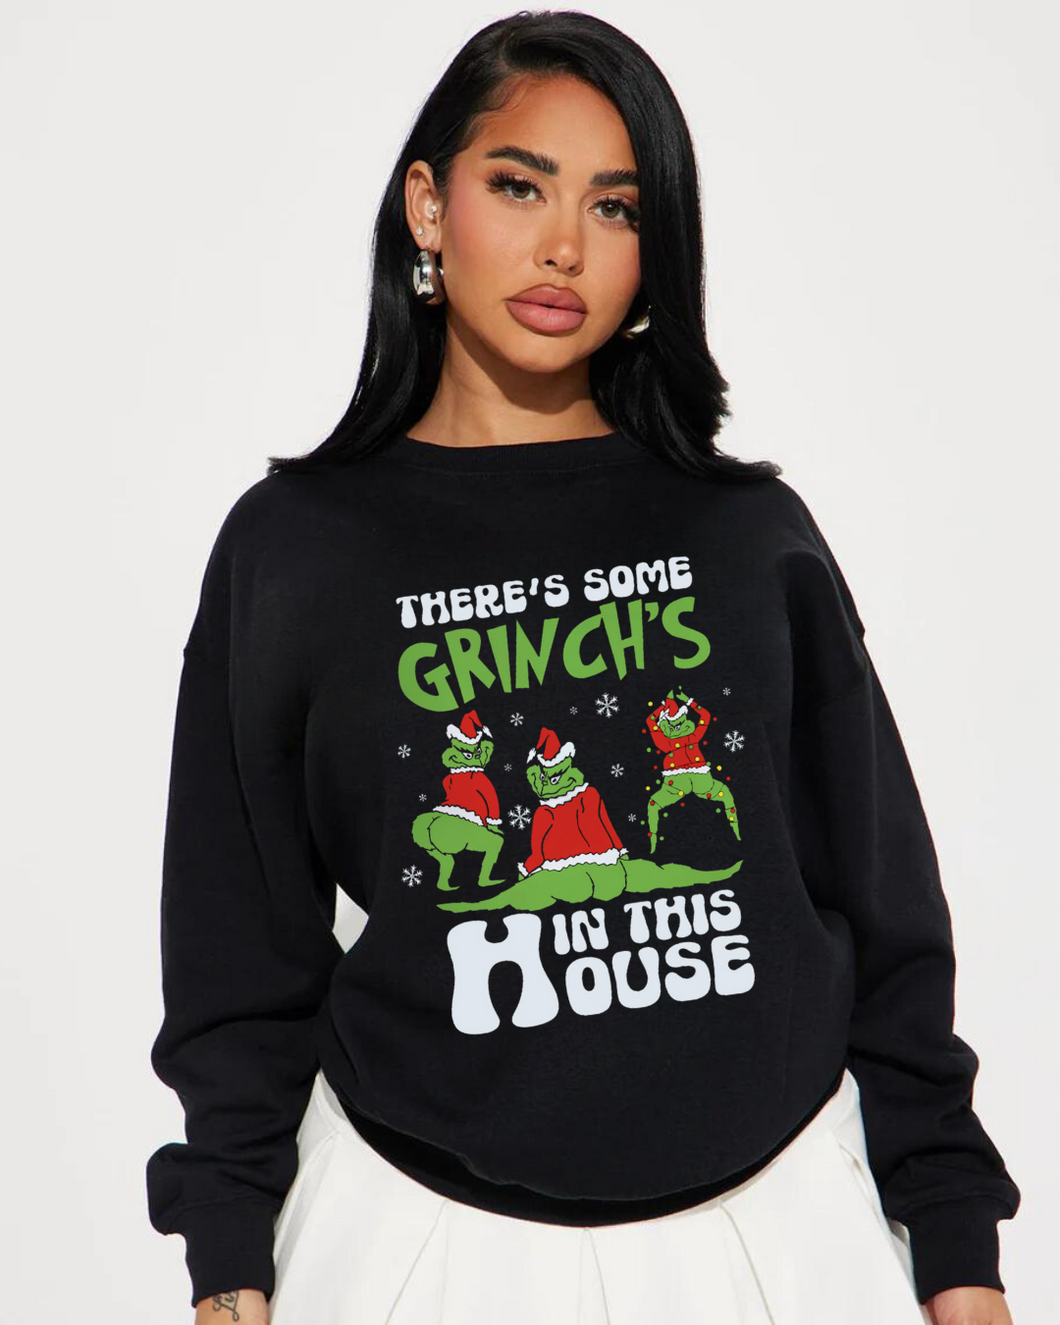 Some Grinchs in the House Sweatshirt